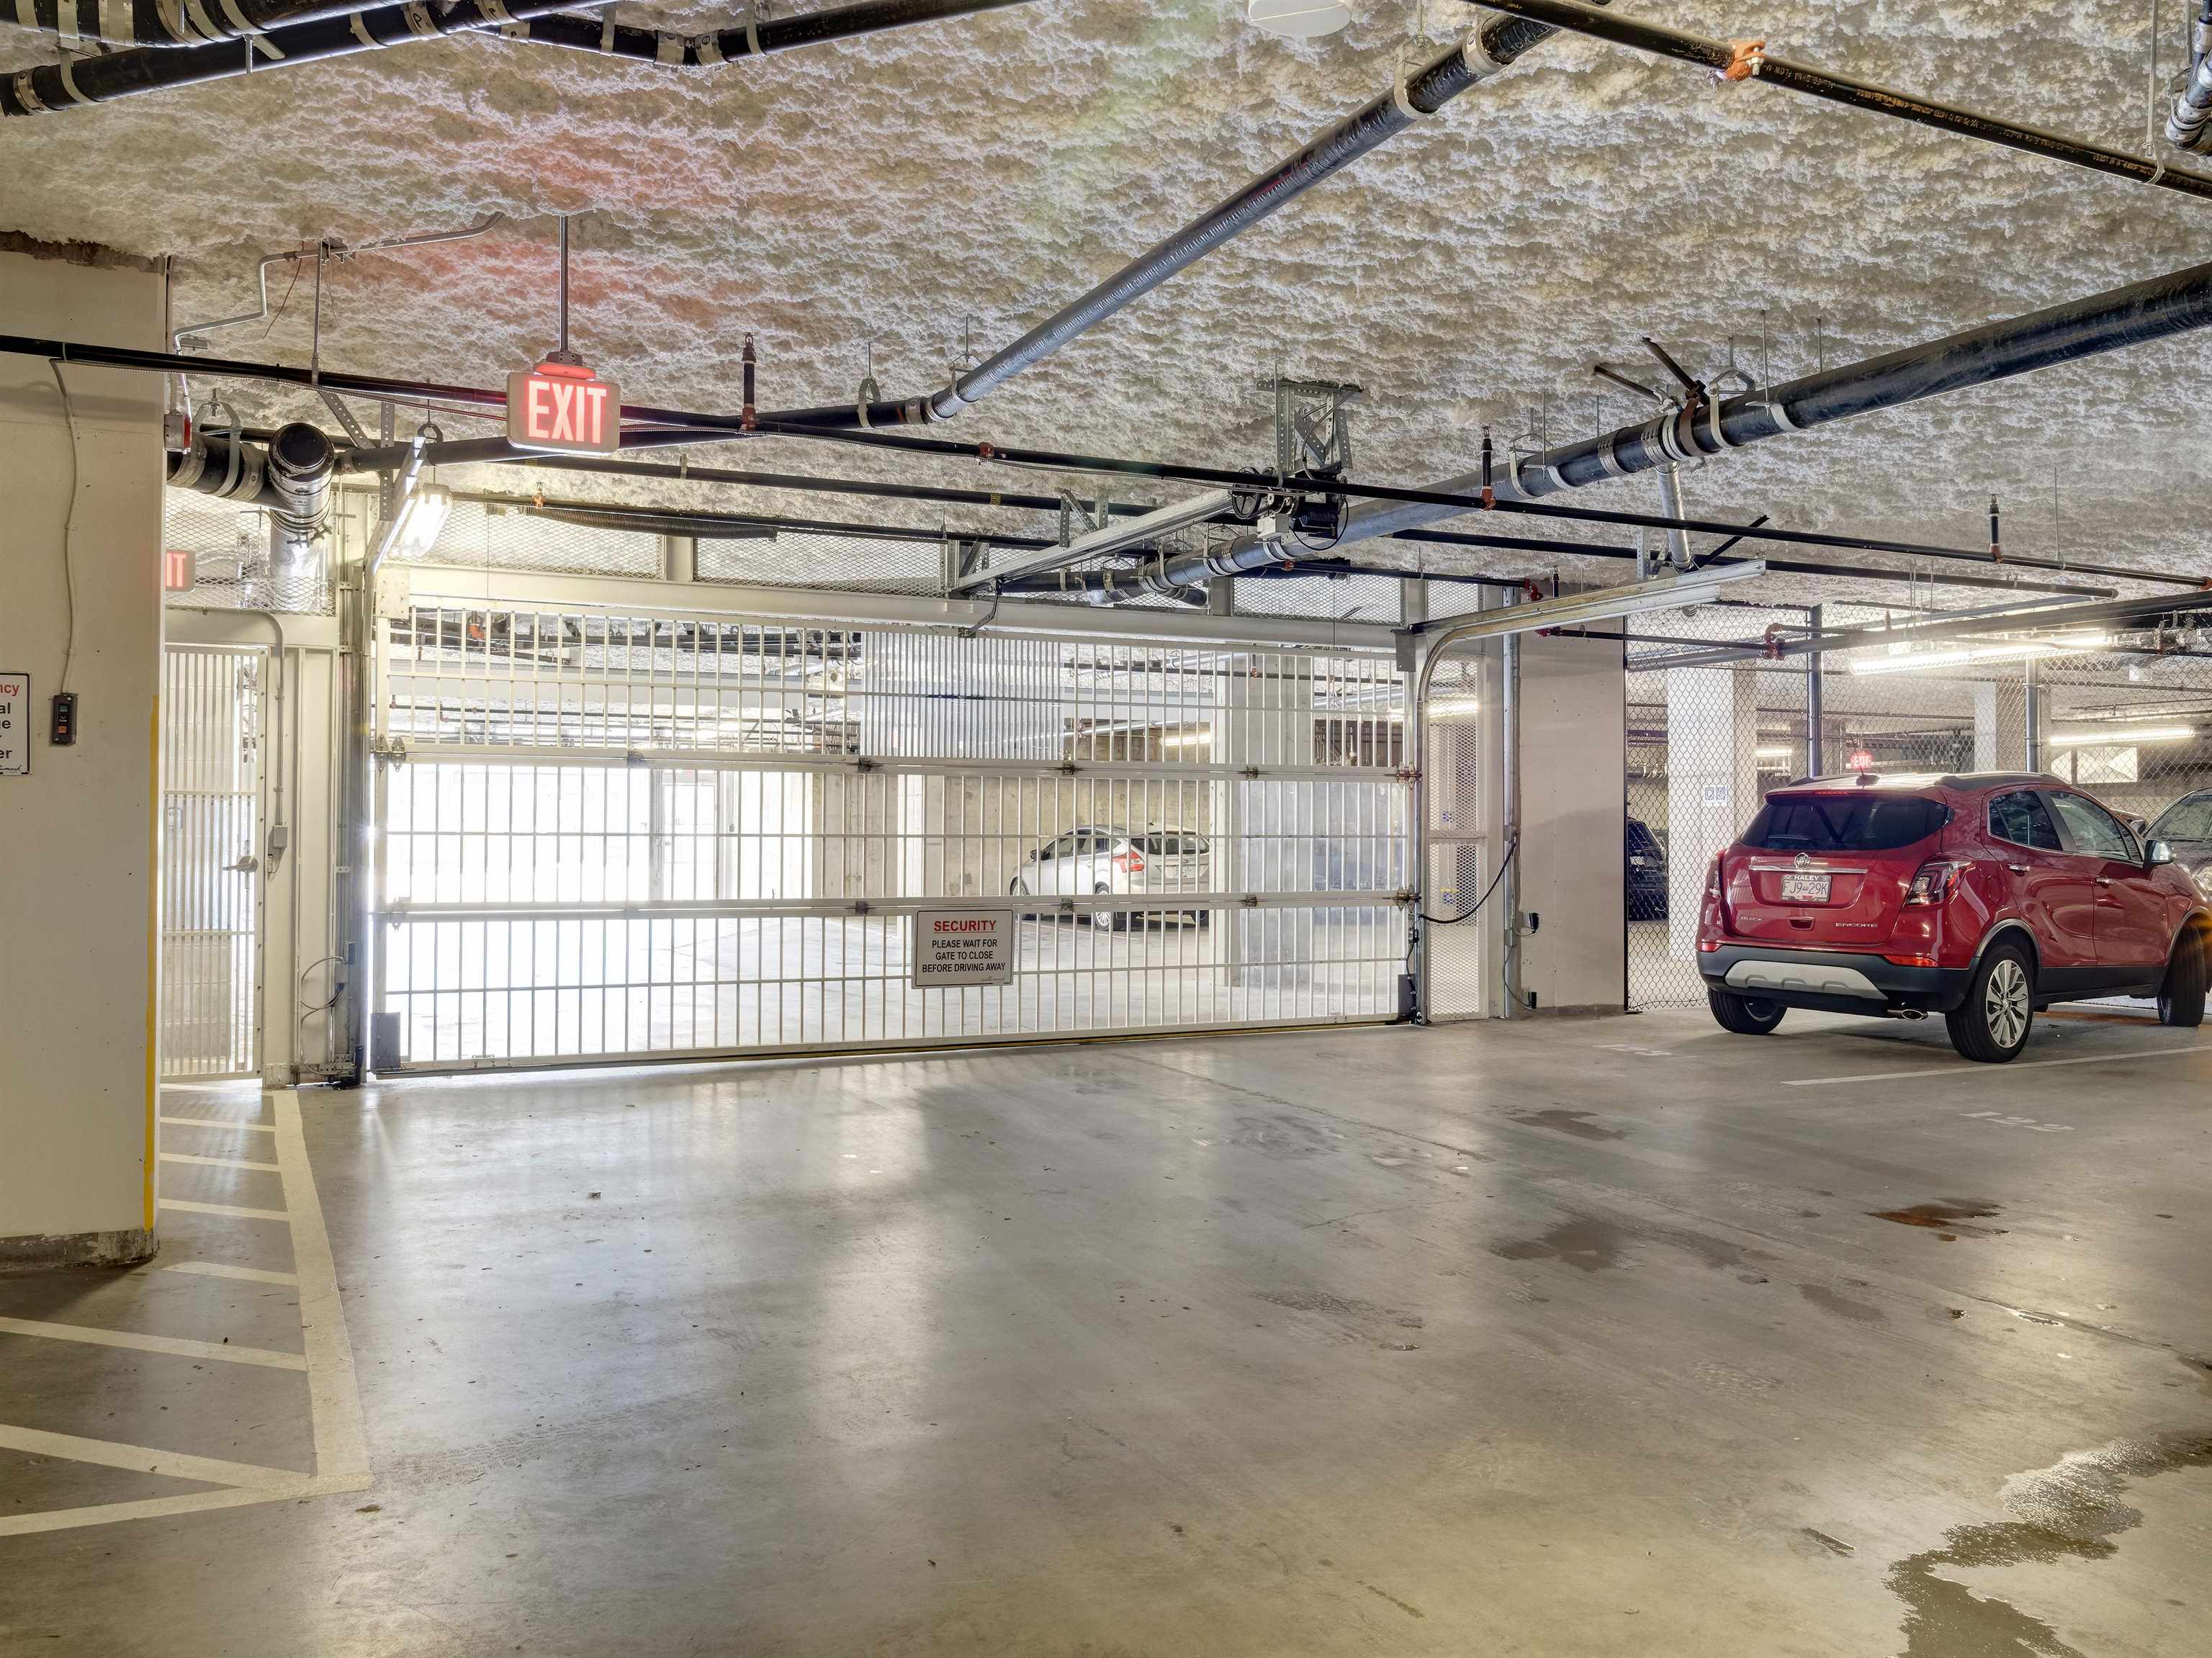 Secure under building parking for all residents. There is public parking under the building as well.